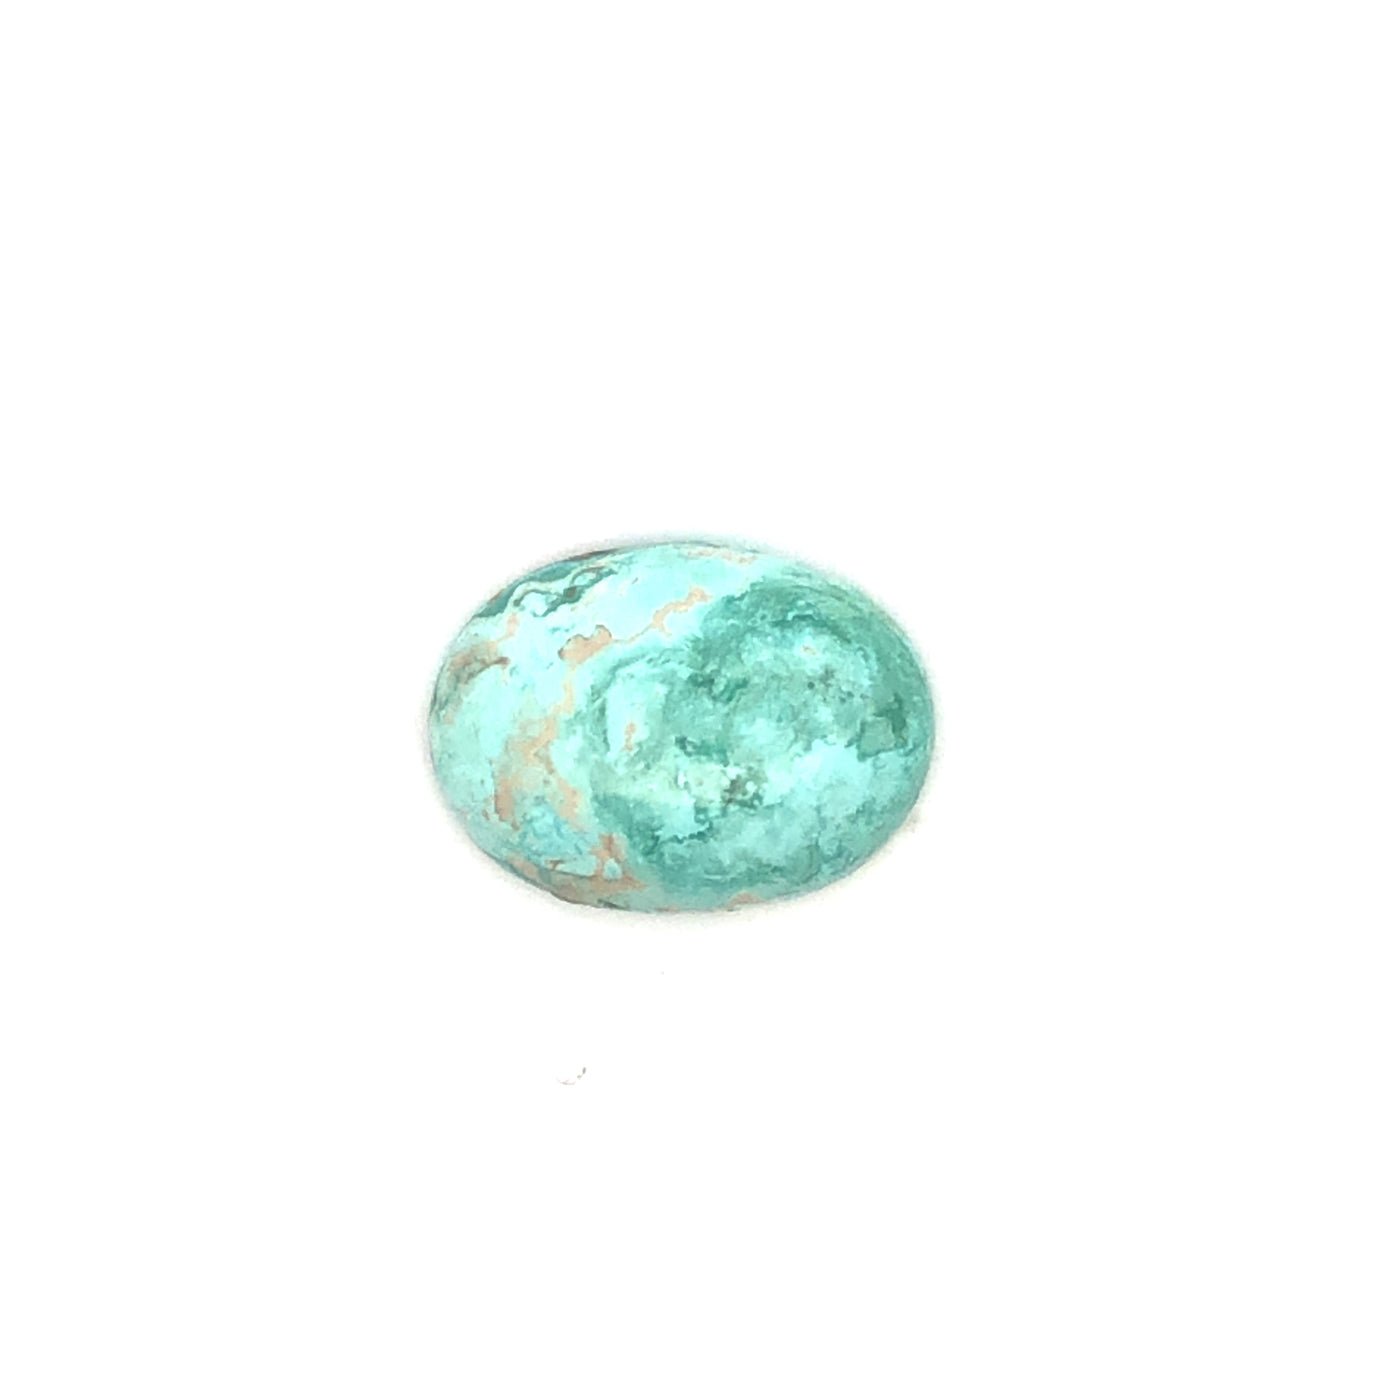 Loose Narooma Turquoise Oval Shaped 17.24Ct Blue With Some White